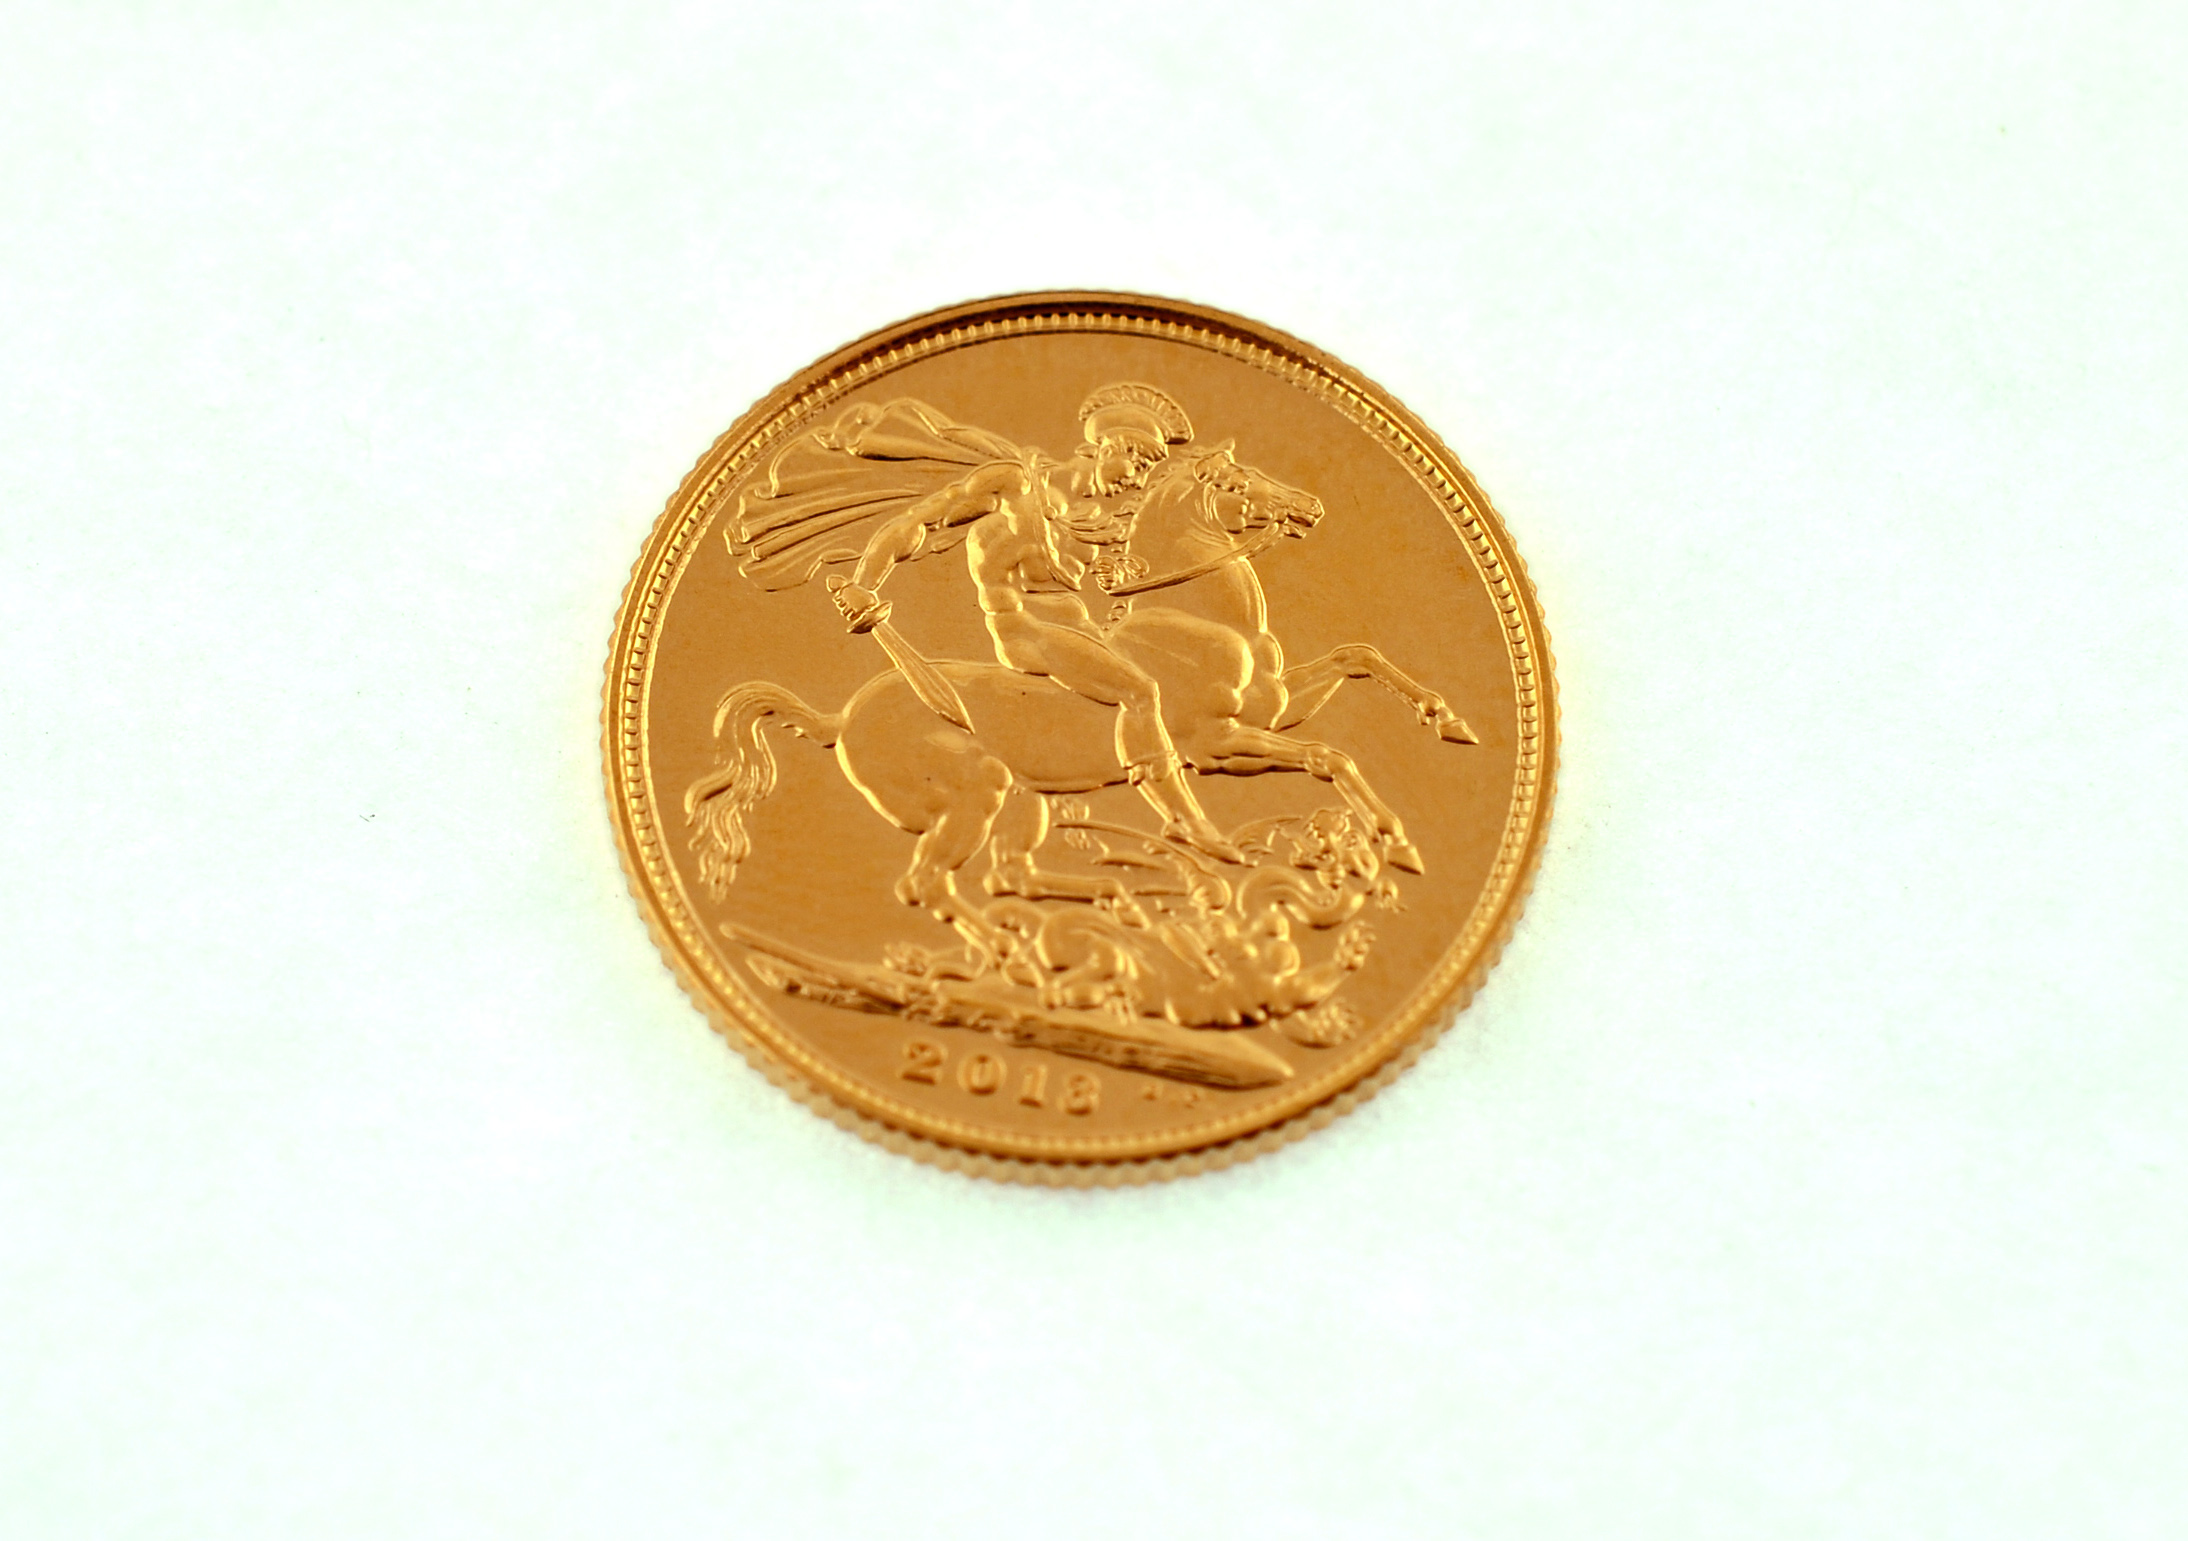 A 2013 full gold sovereign.